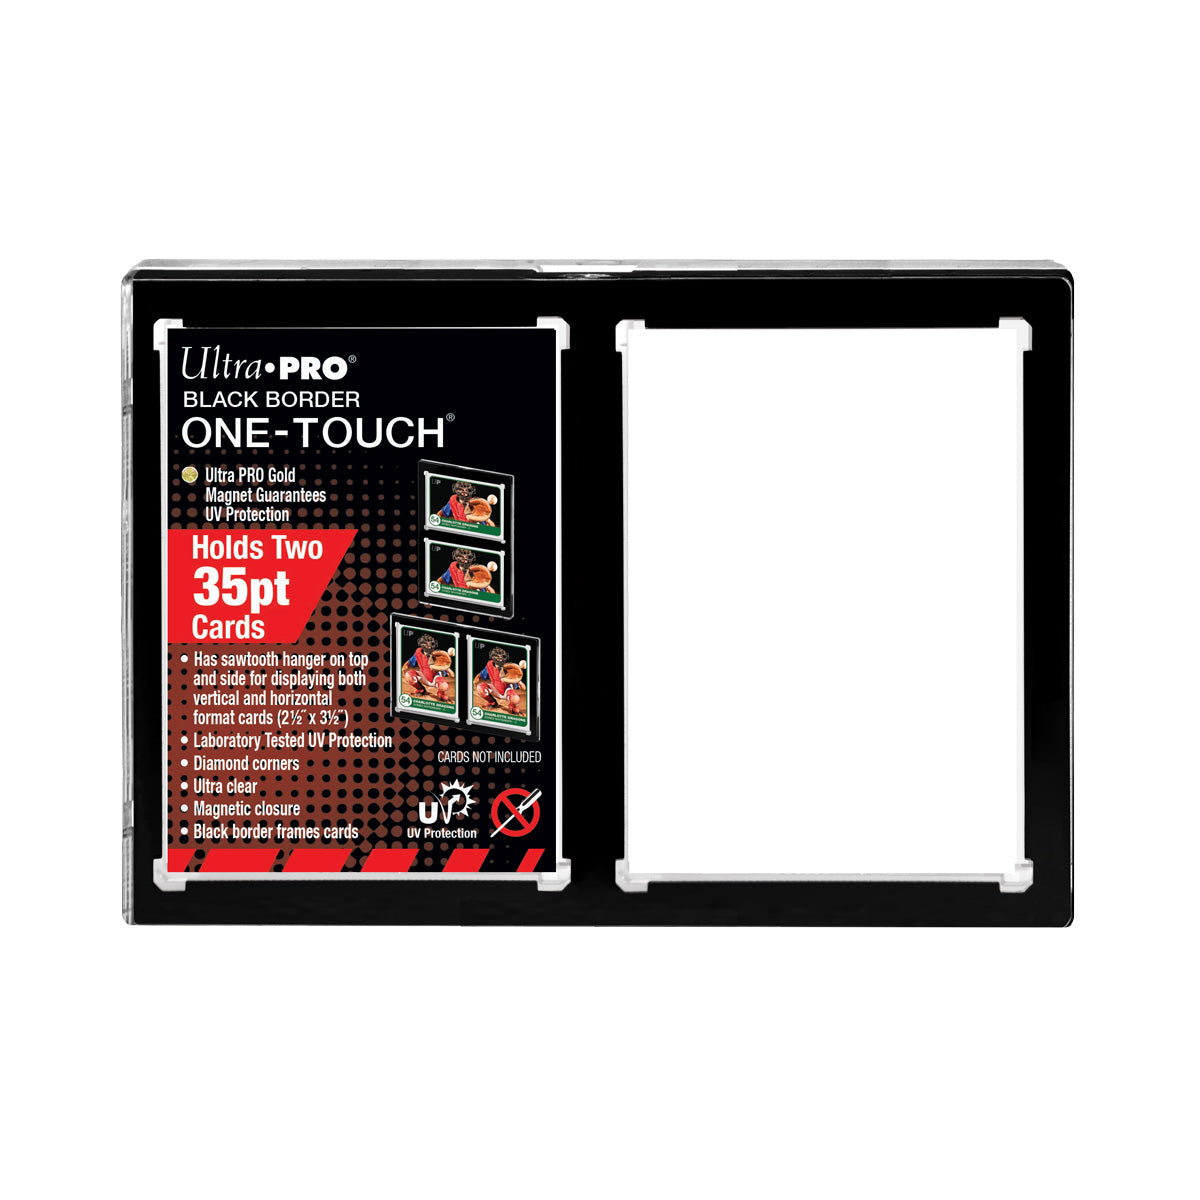 Ultra Pro One-Touch (35pt) 2-kort Sort Ramme - Sports Cards Norge